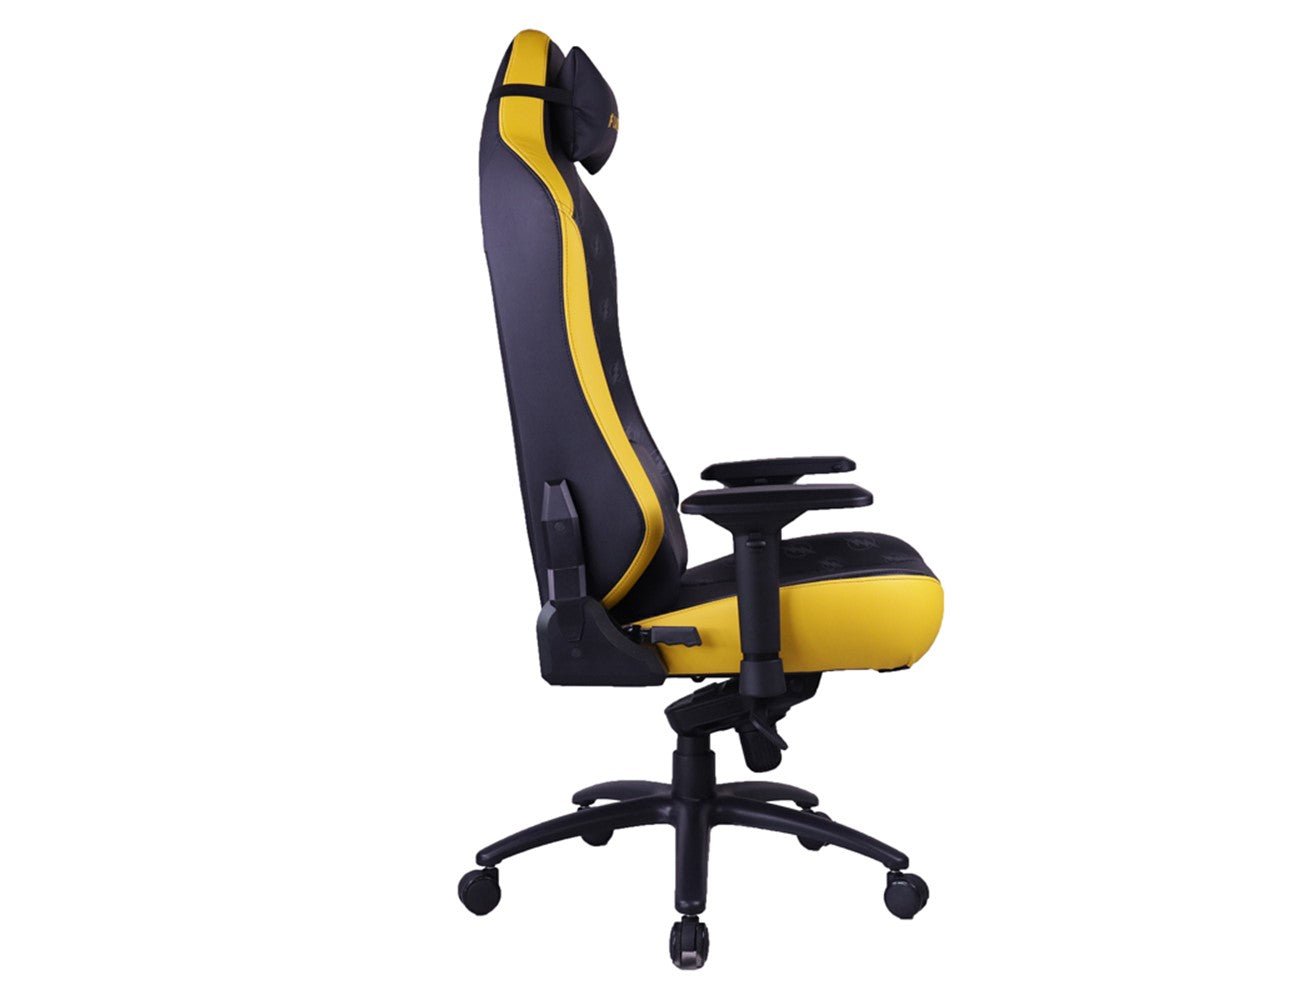 GameOn Licensed Gaming Chair With Adjustable 4D Armrest & Metal Base - Flash